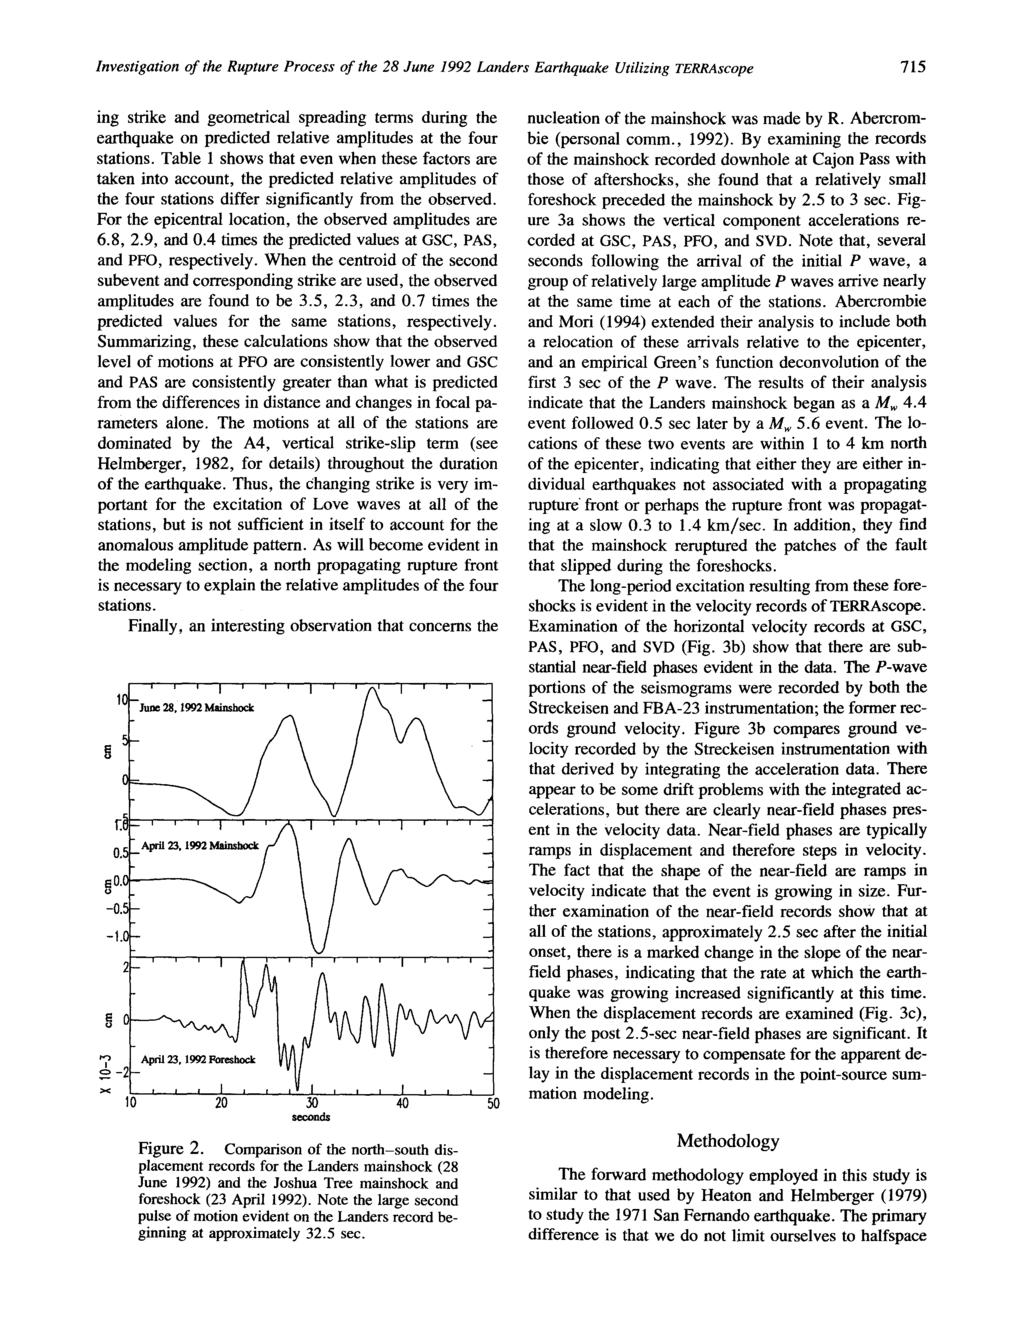 nvestigation of the Rupture Process of the 28 June 1992 Landers Earthquake Utilizing TERRAscope 715 ing strike and geometrical spreading terms during the earthquake on predicted relative amplitudes